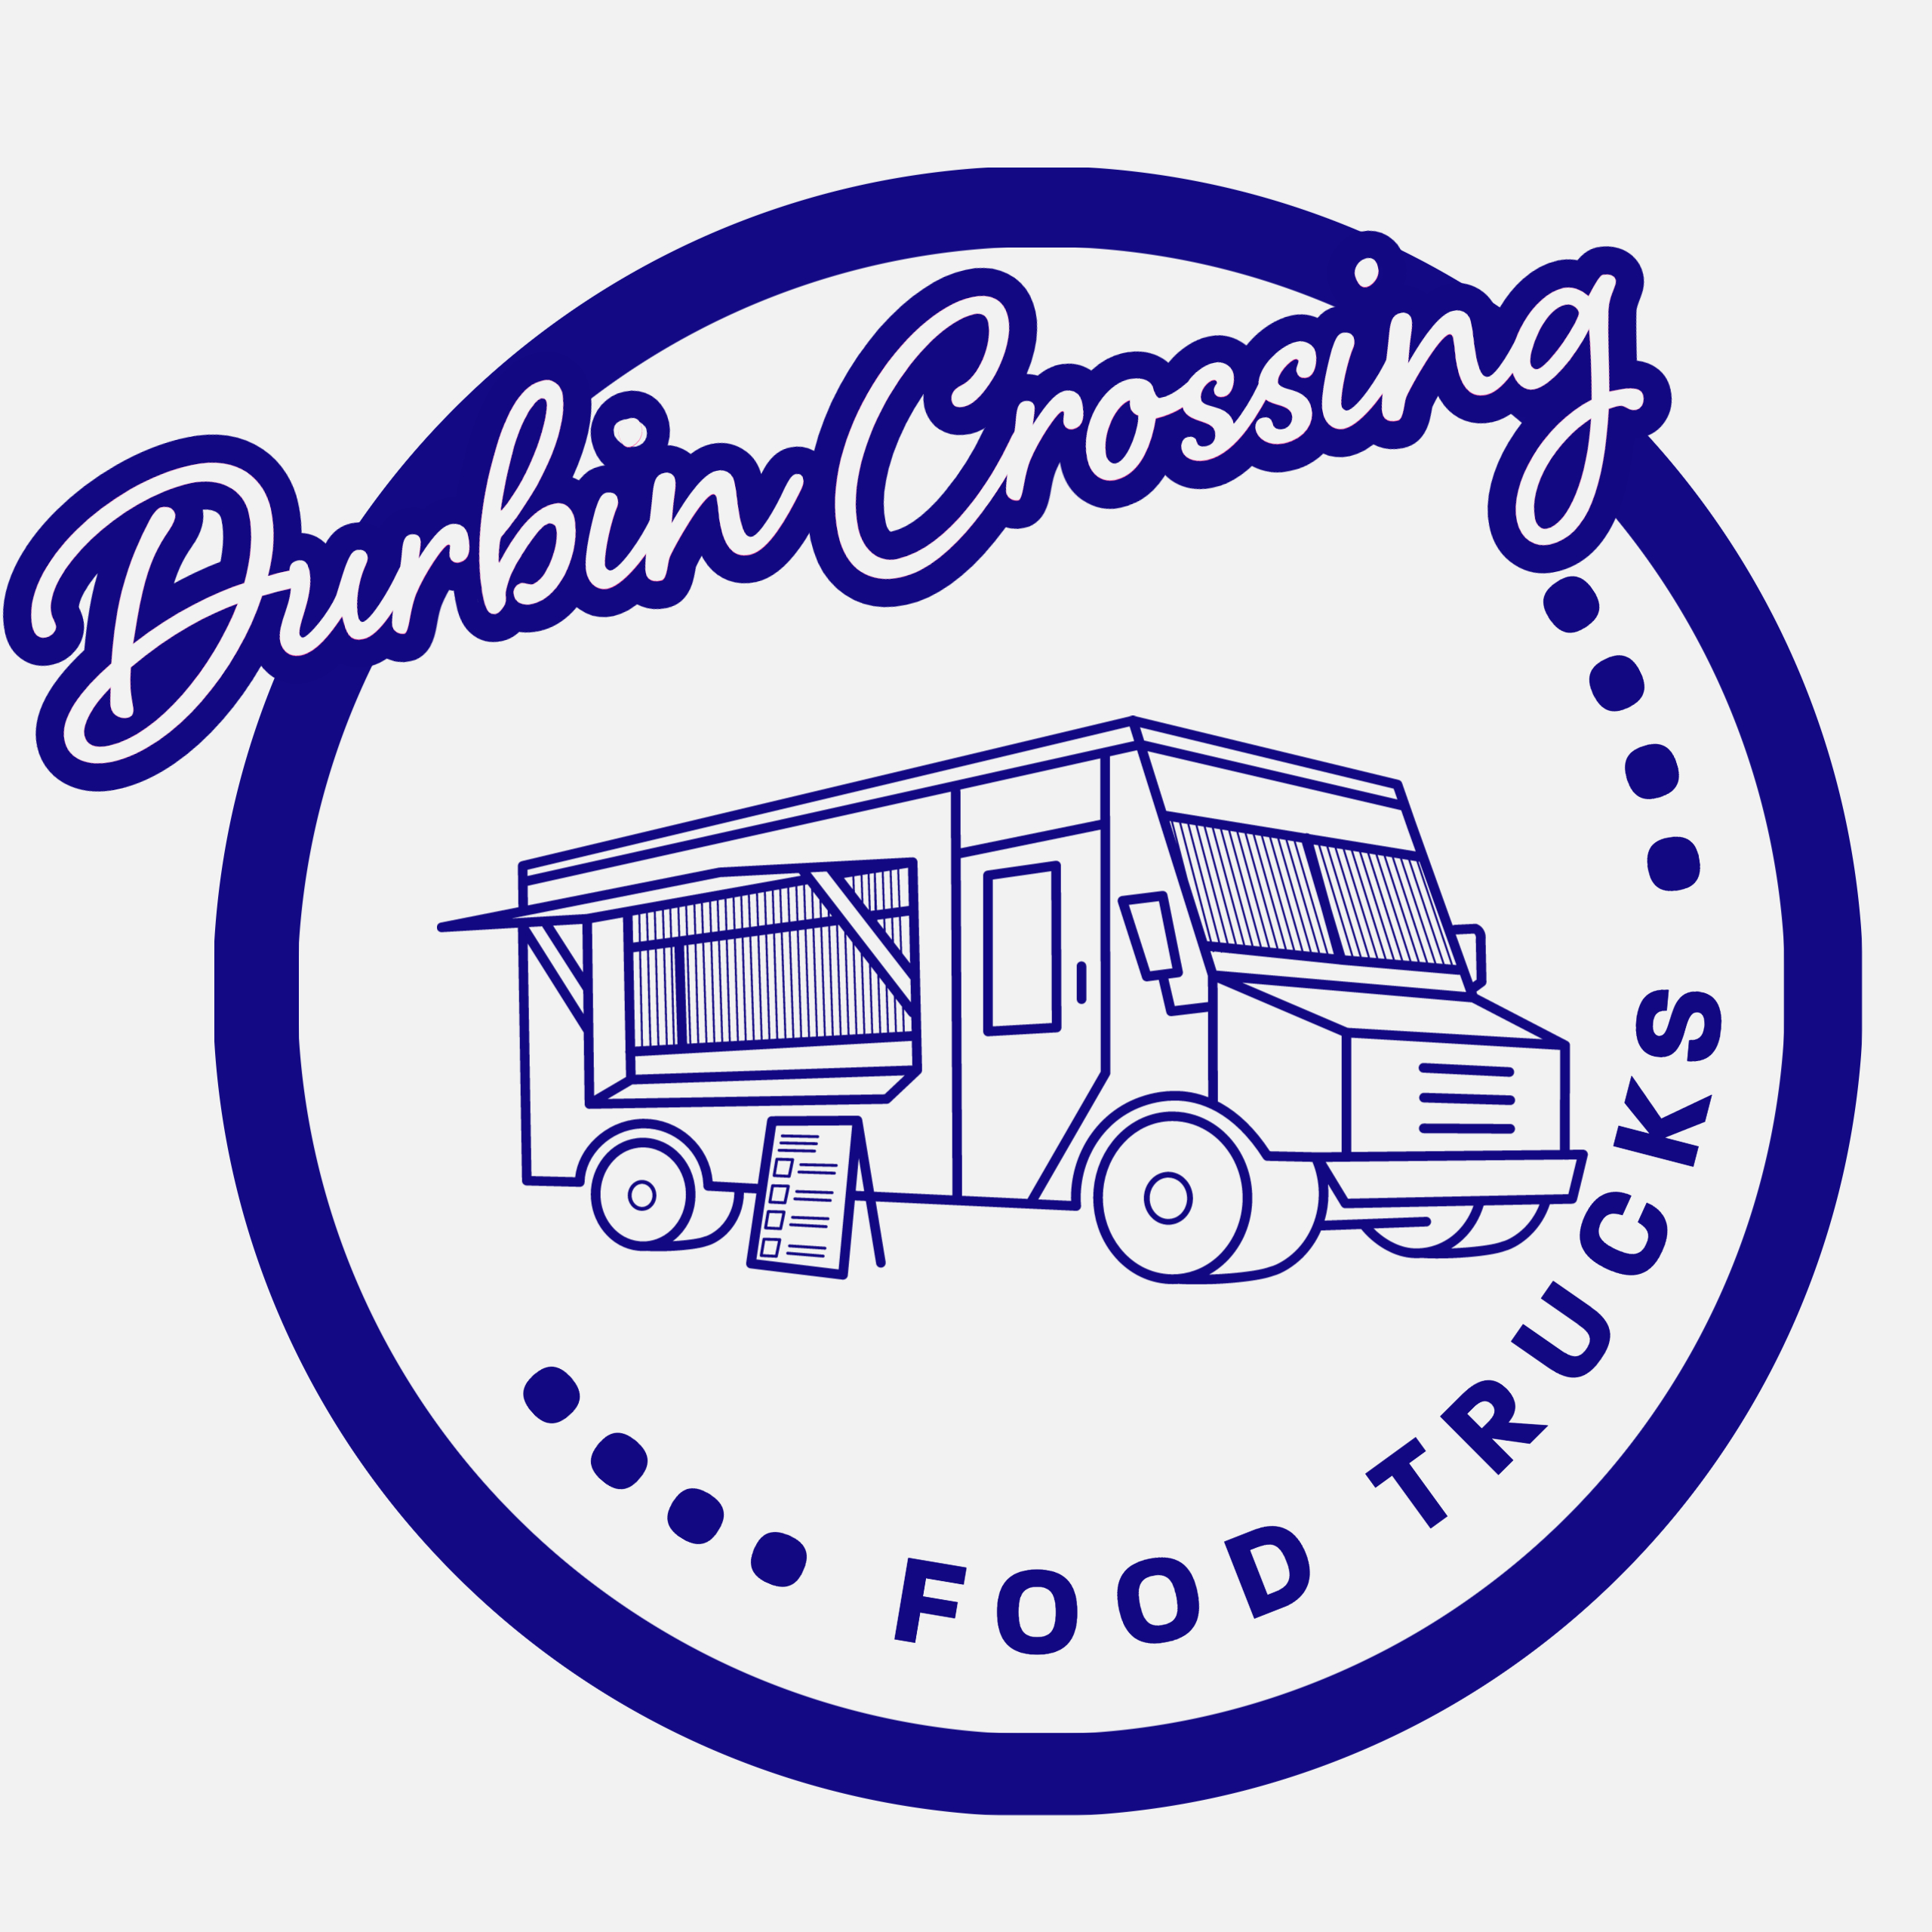 Food Truck with Durbin Crossing text above it.